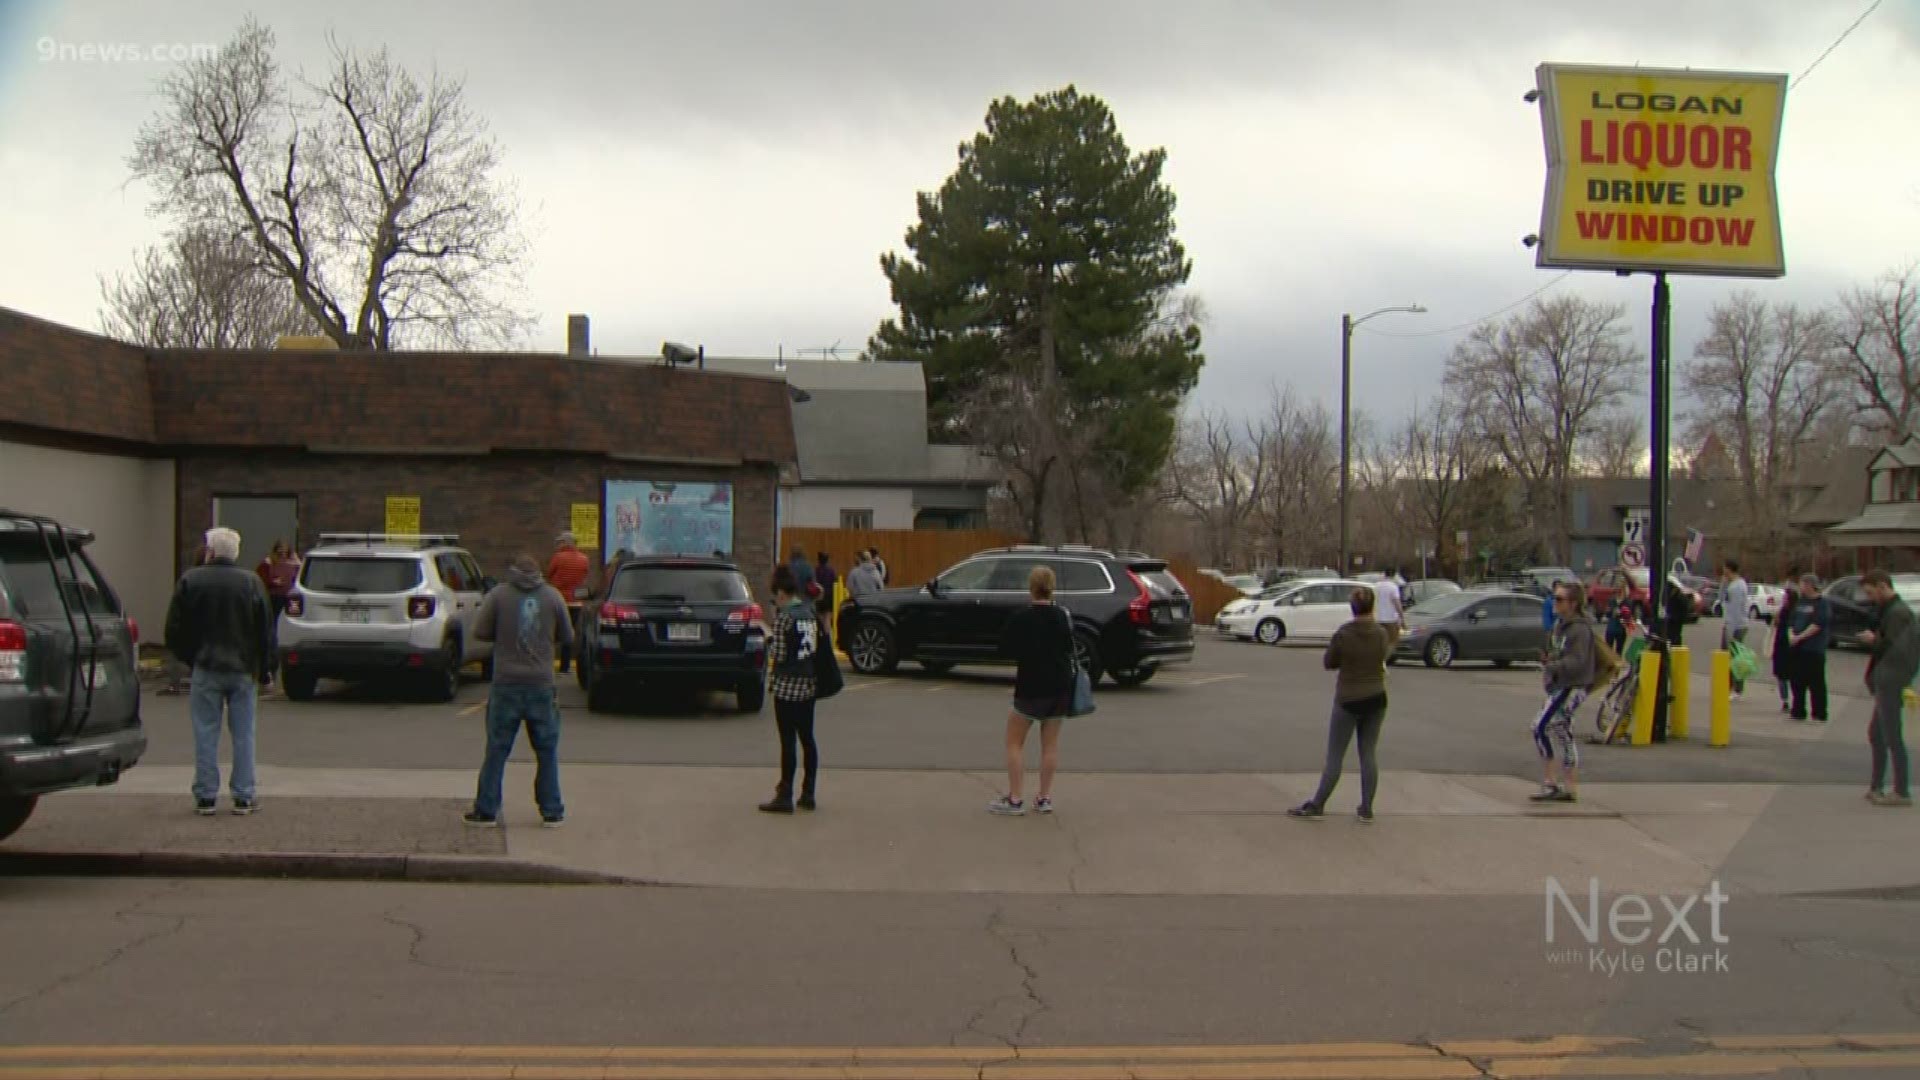 Denver said liquor stores and recreational pot shops have to close during the COVID-19 "shelter in place order," and people flooded those businesses.